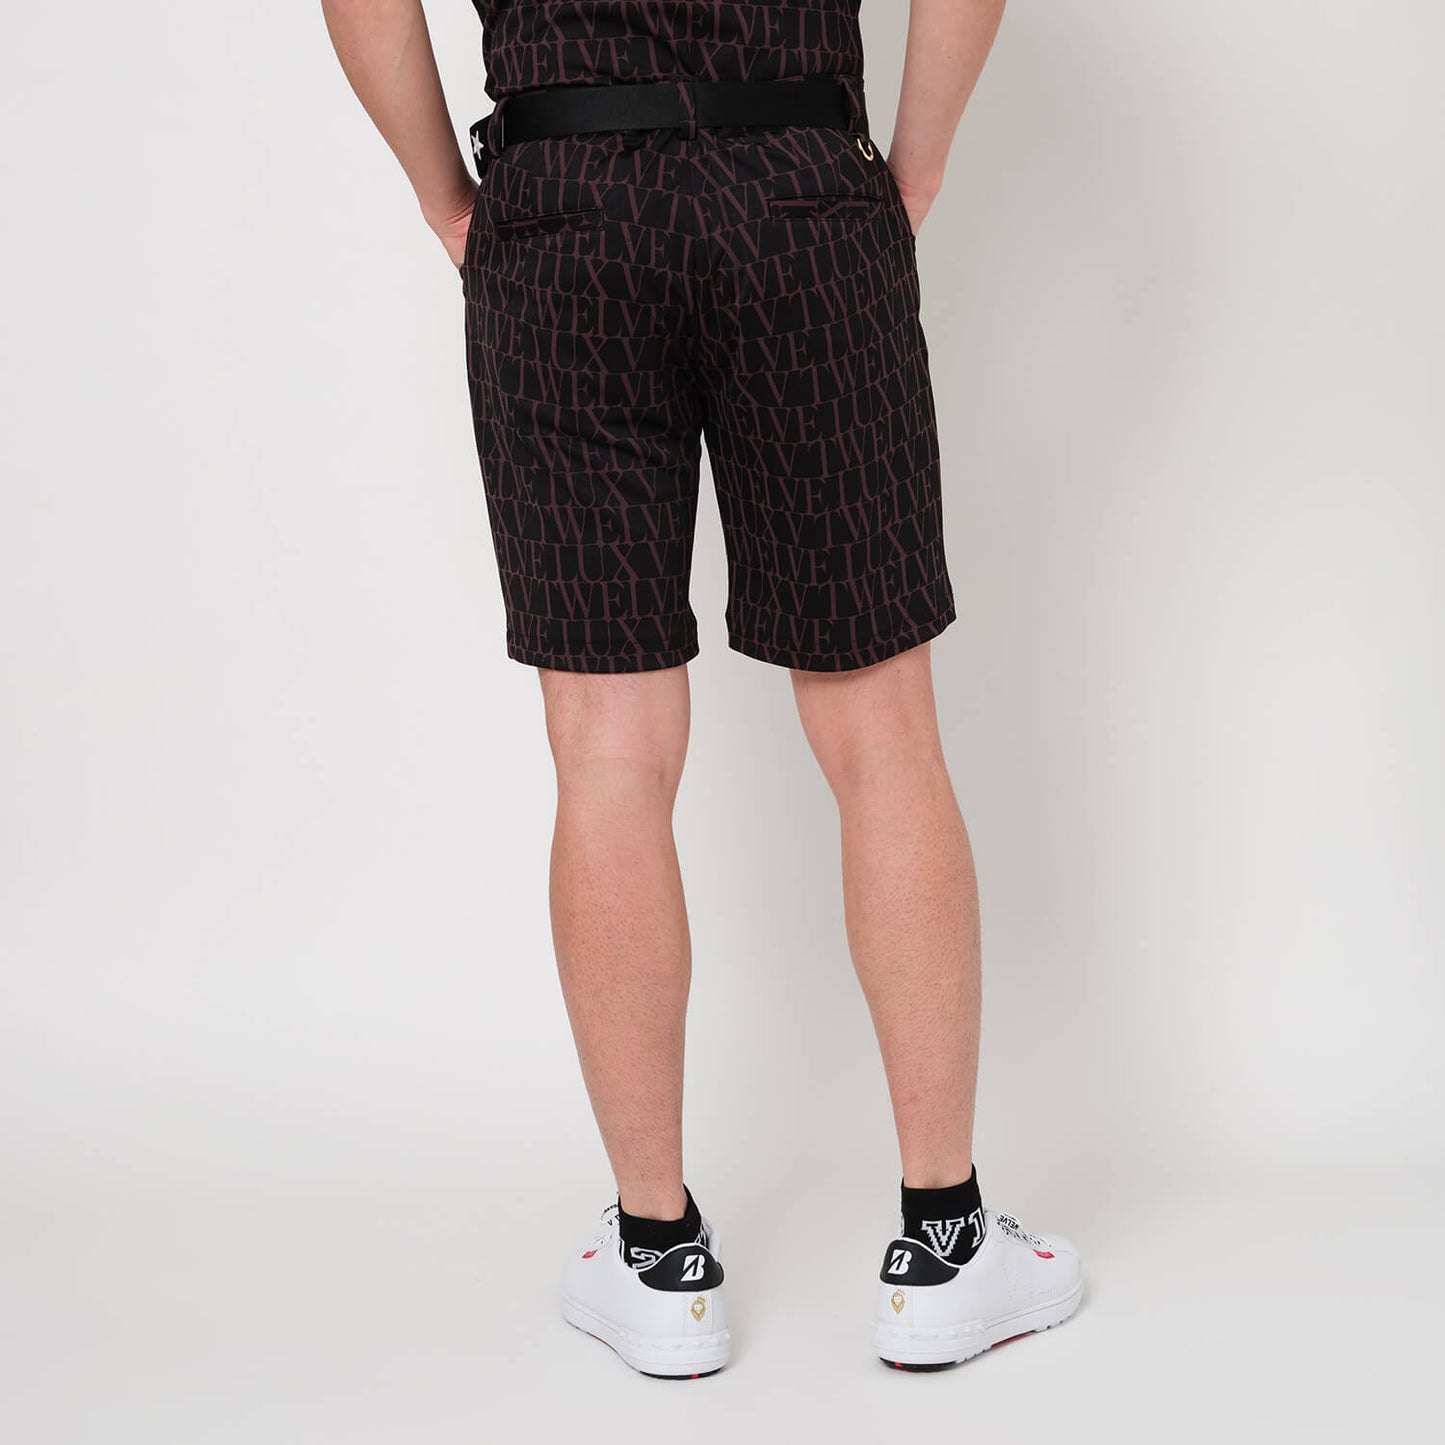 LX ALL LETTER SHORTS